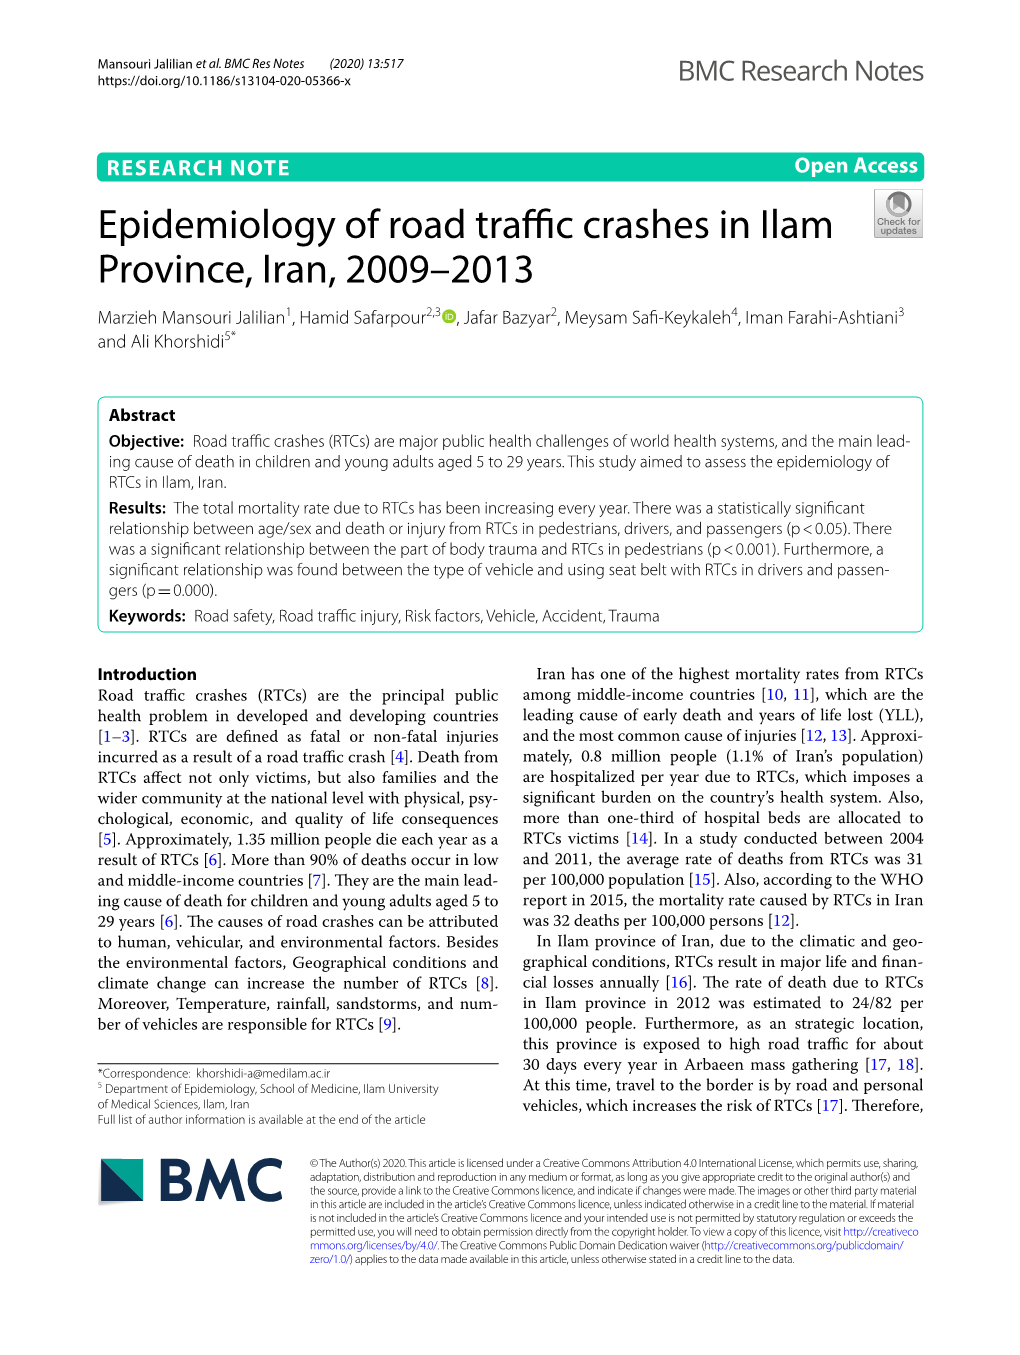 Epidemiology of Road Traffic Crashes in Ilam Province, Iran, 2009–2013